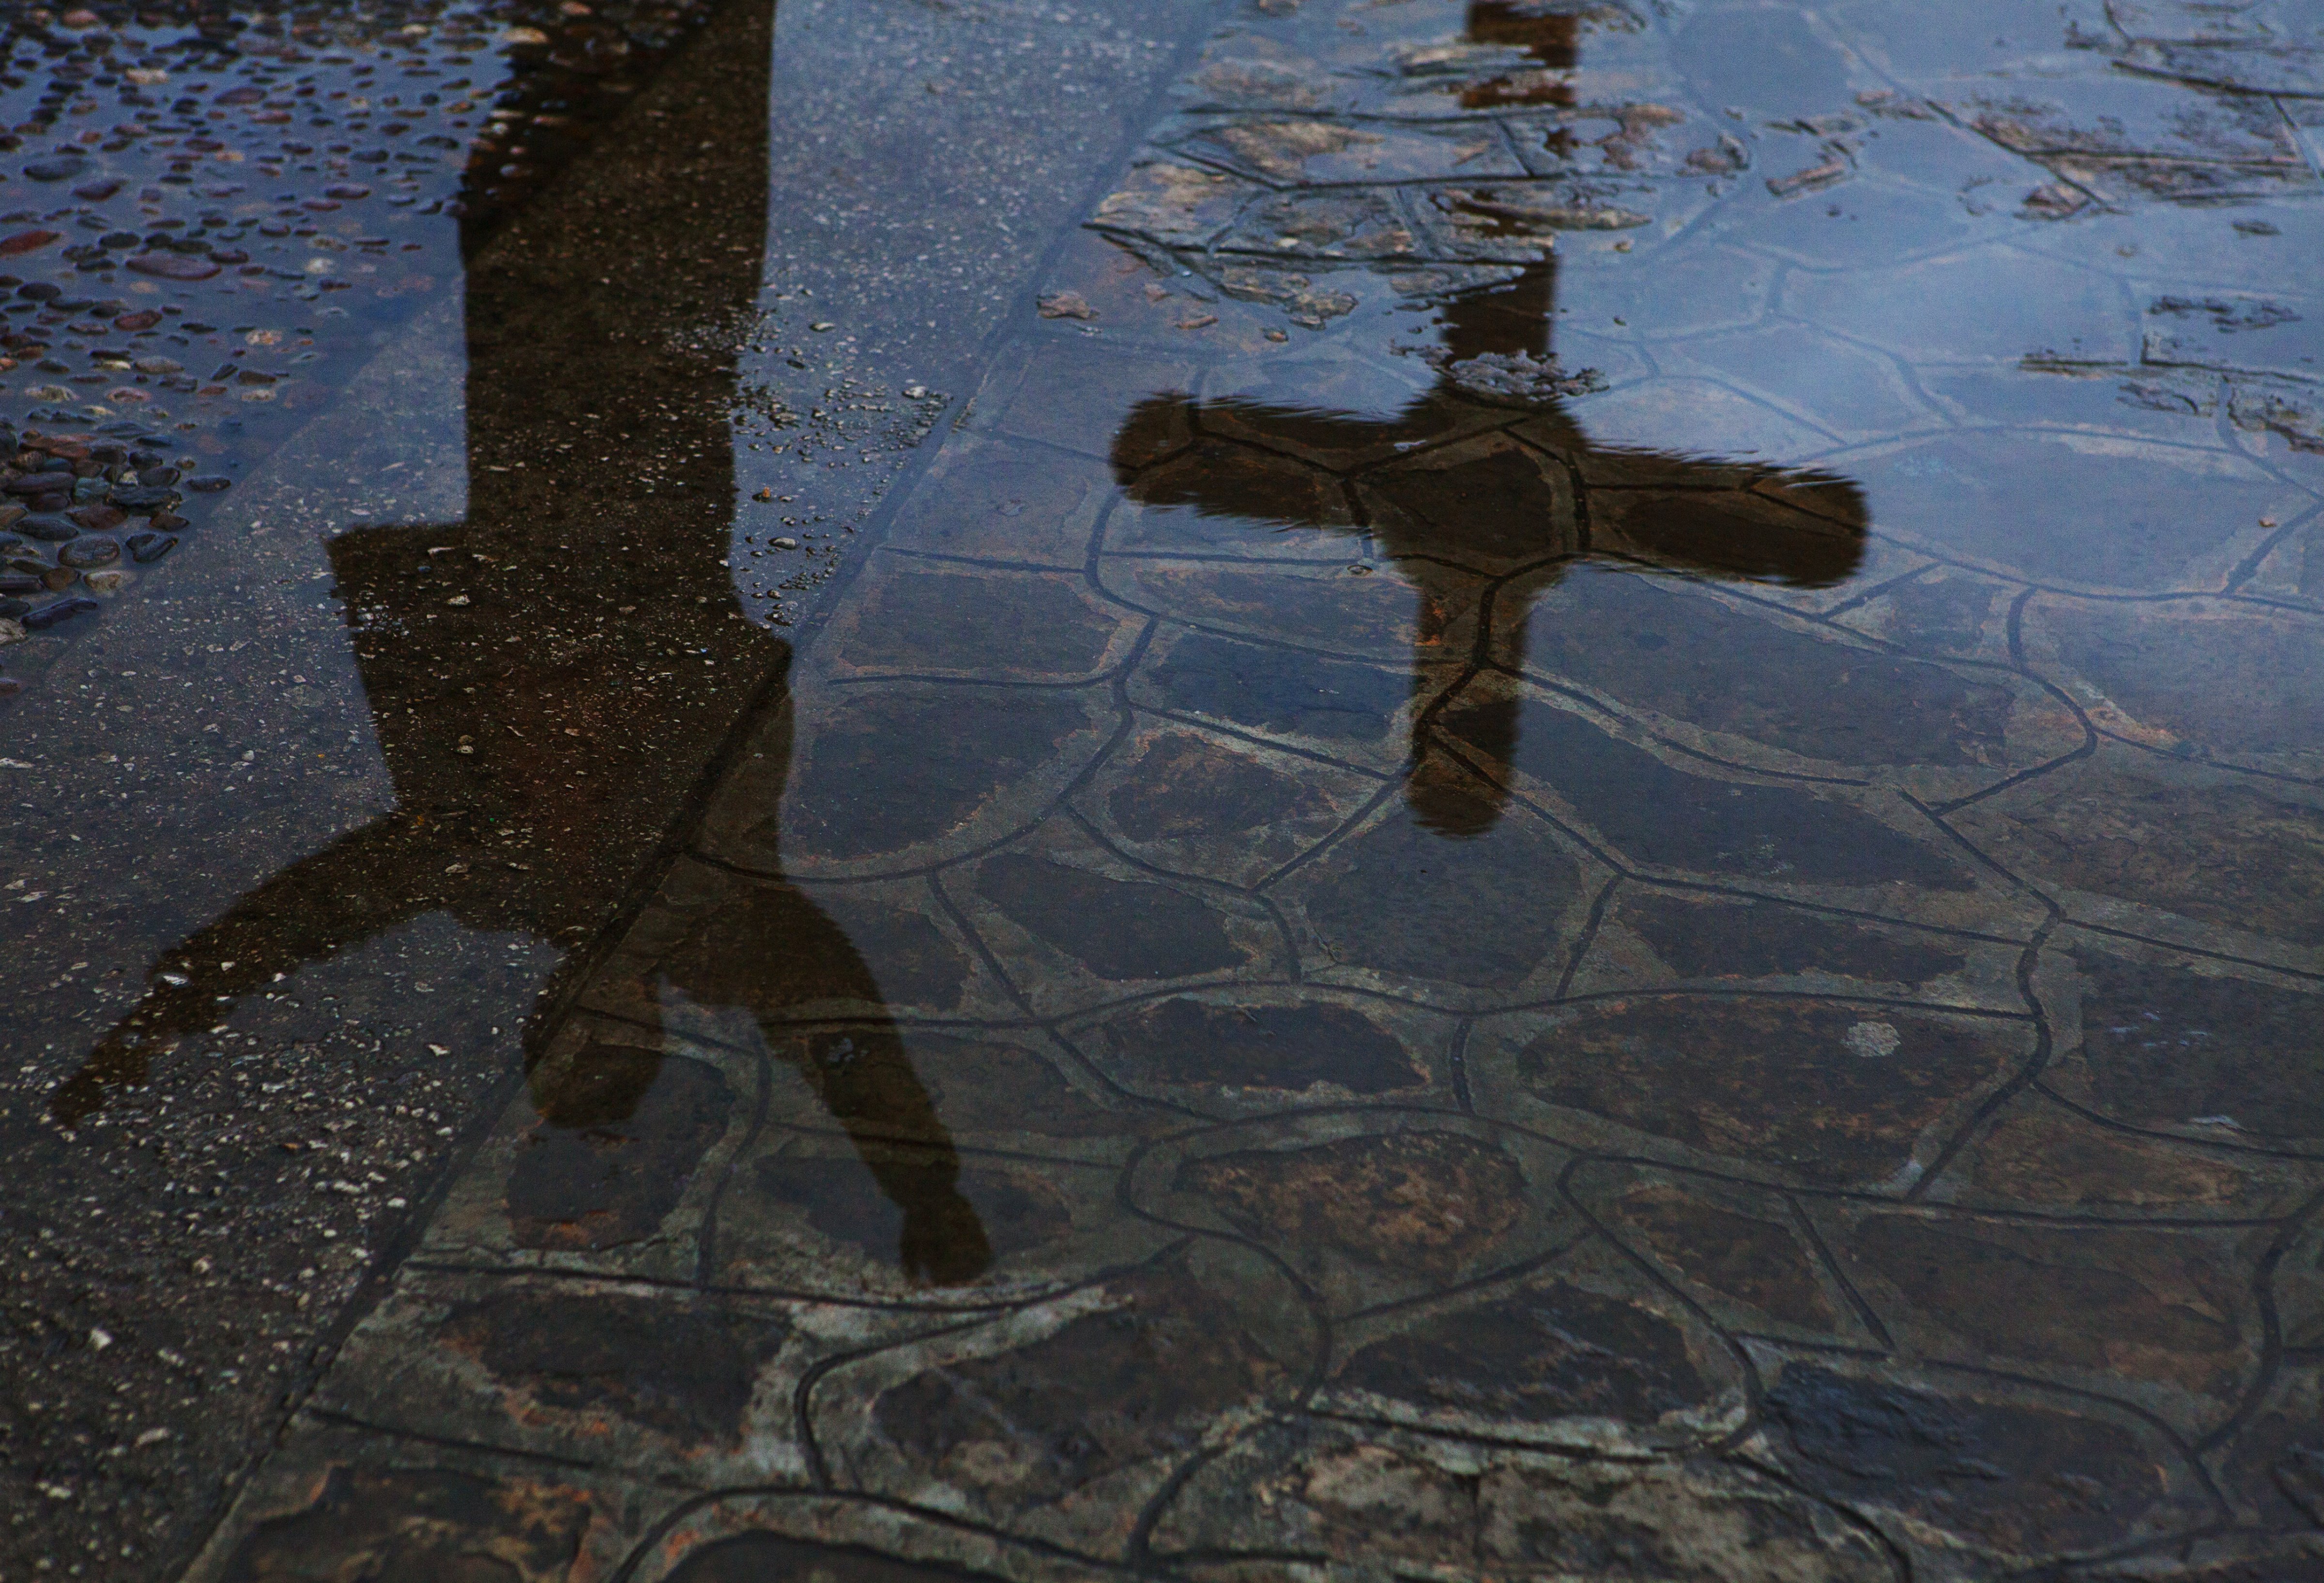 187138413Reflection of man and crucifix in city puddle